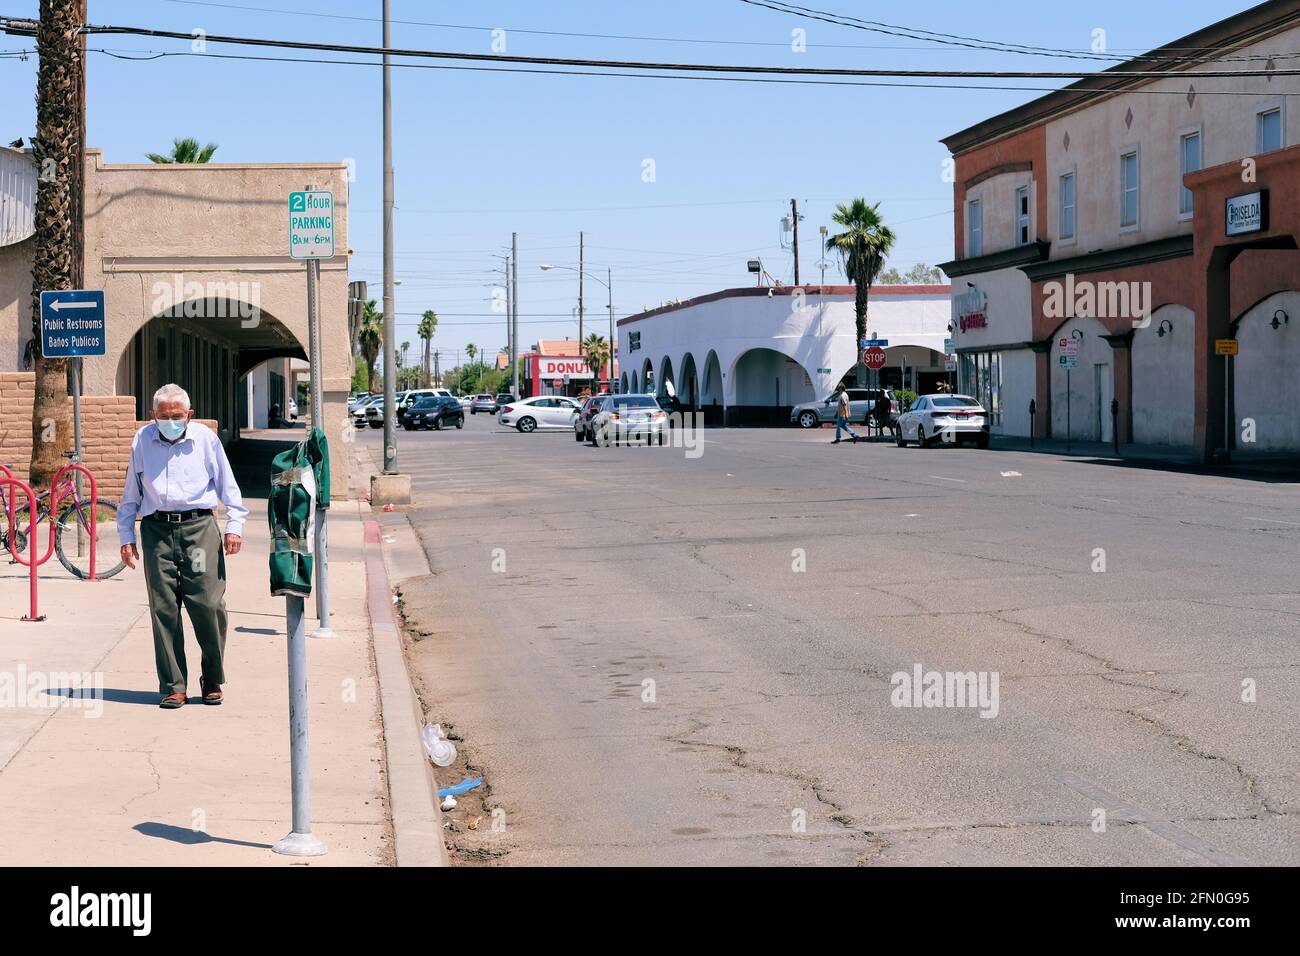 Masked old man walking alone on a sidewalk in a near empty downtown Calexico, California during the Covid-19 pandemic; elderly gentleman all alone. Stock Photo